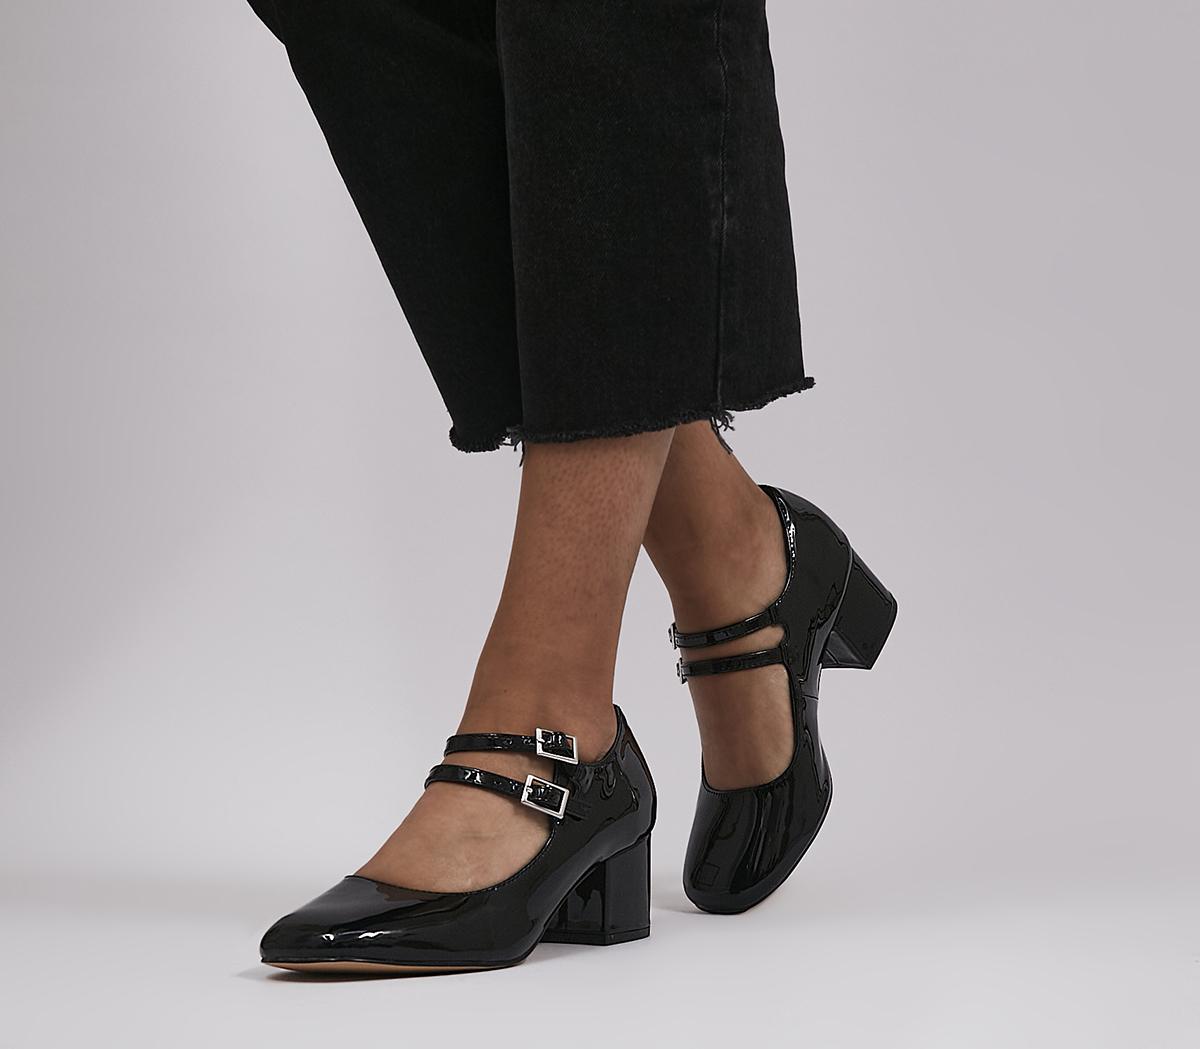 Black Patent Flared Block Heel Mary Jane Shoes | New Look